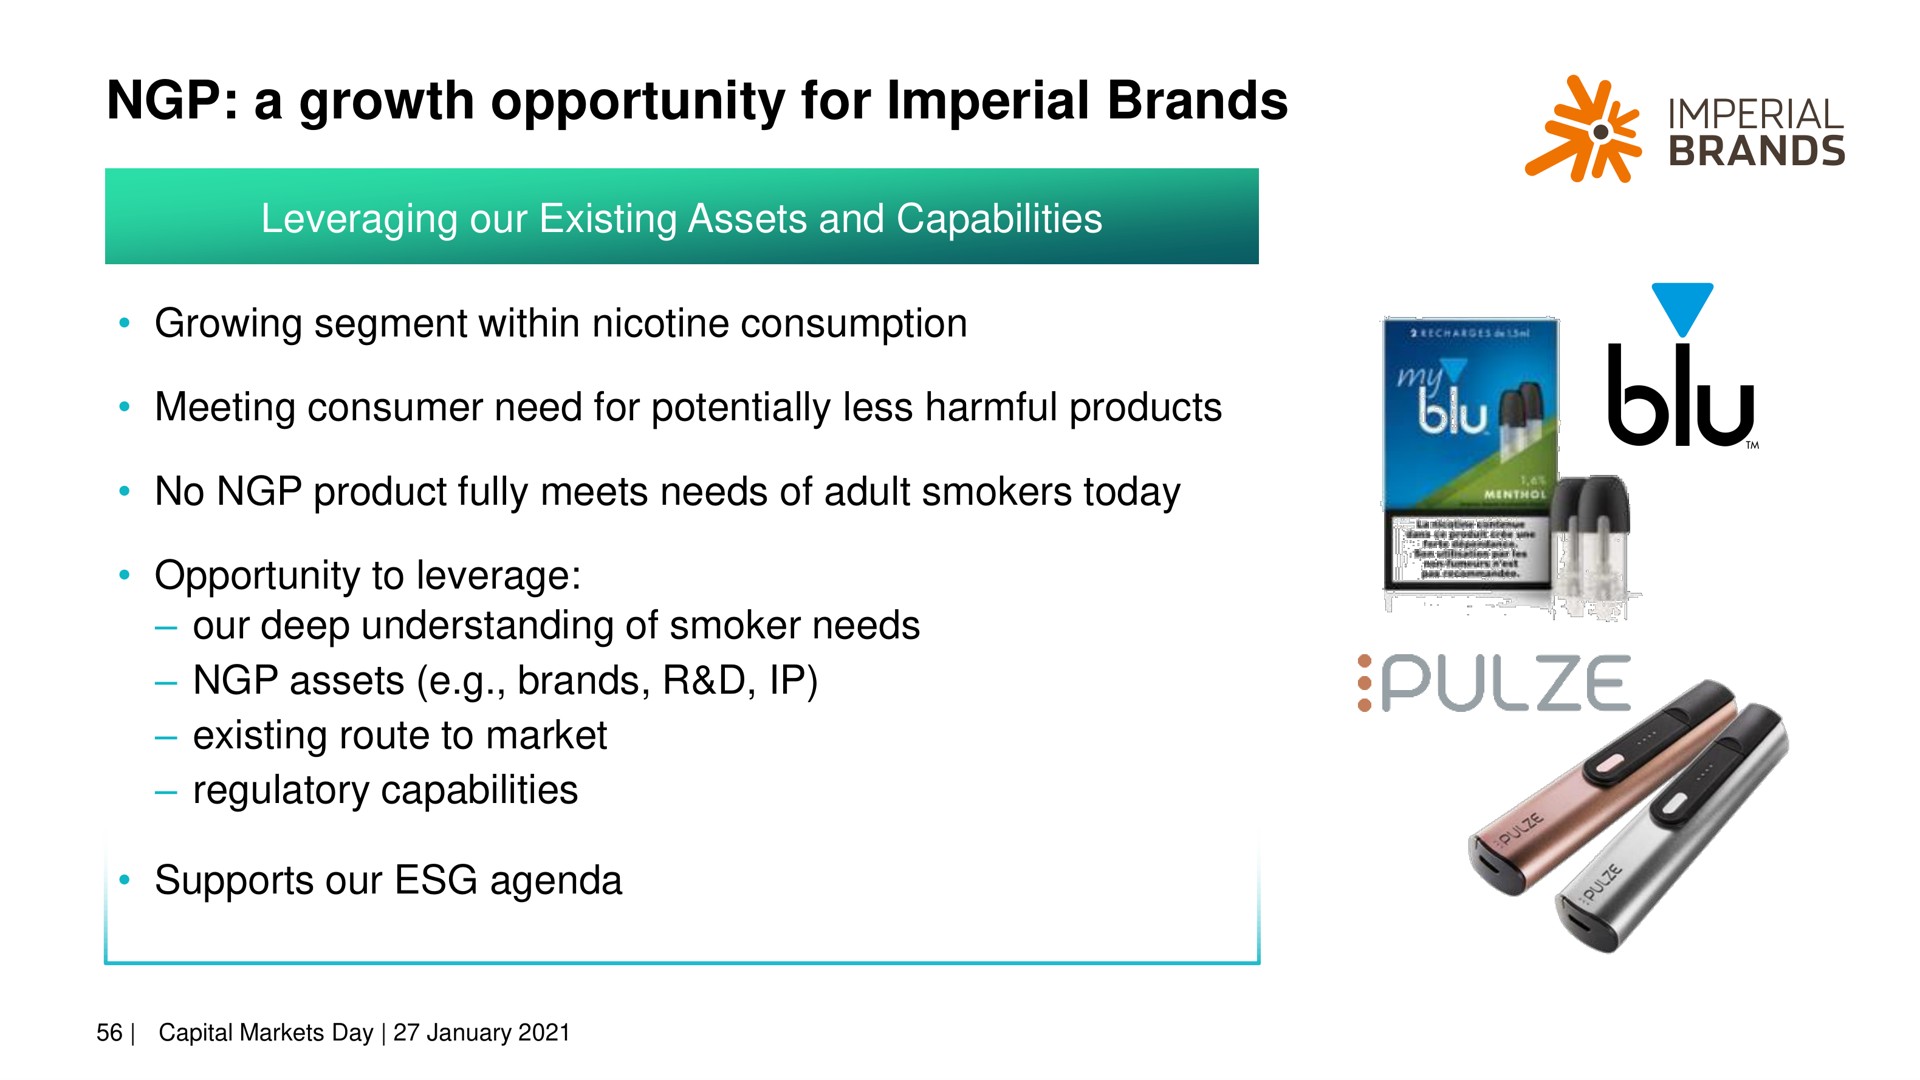 a growth opportunity for imperial brands | Imperial Brands